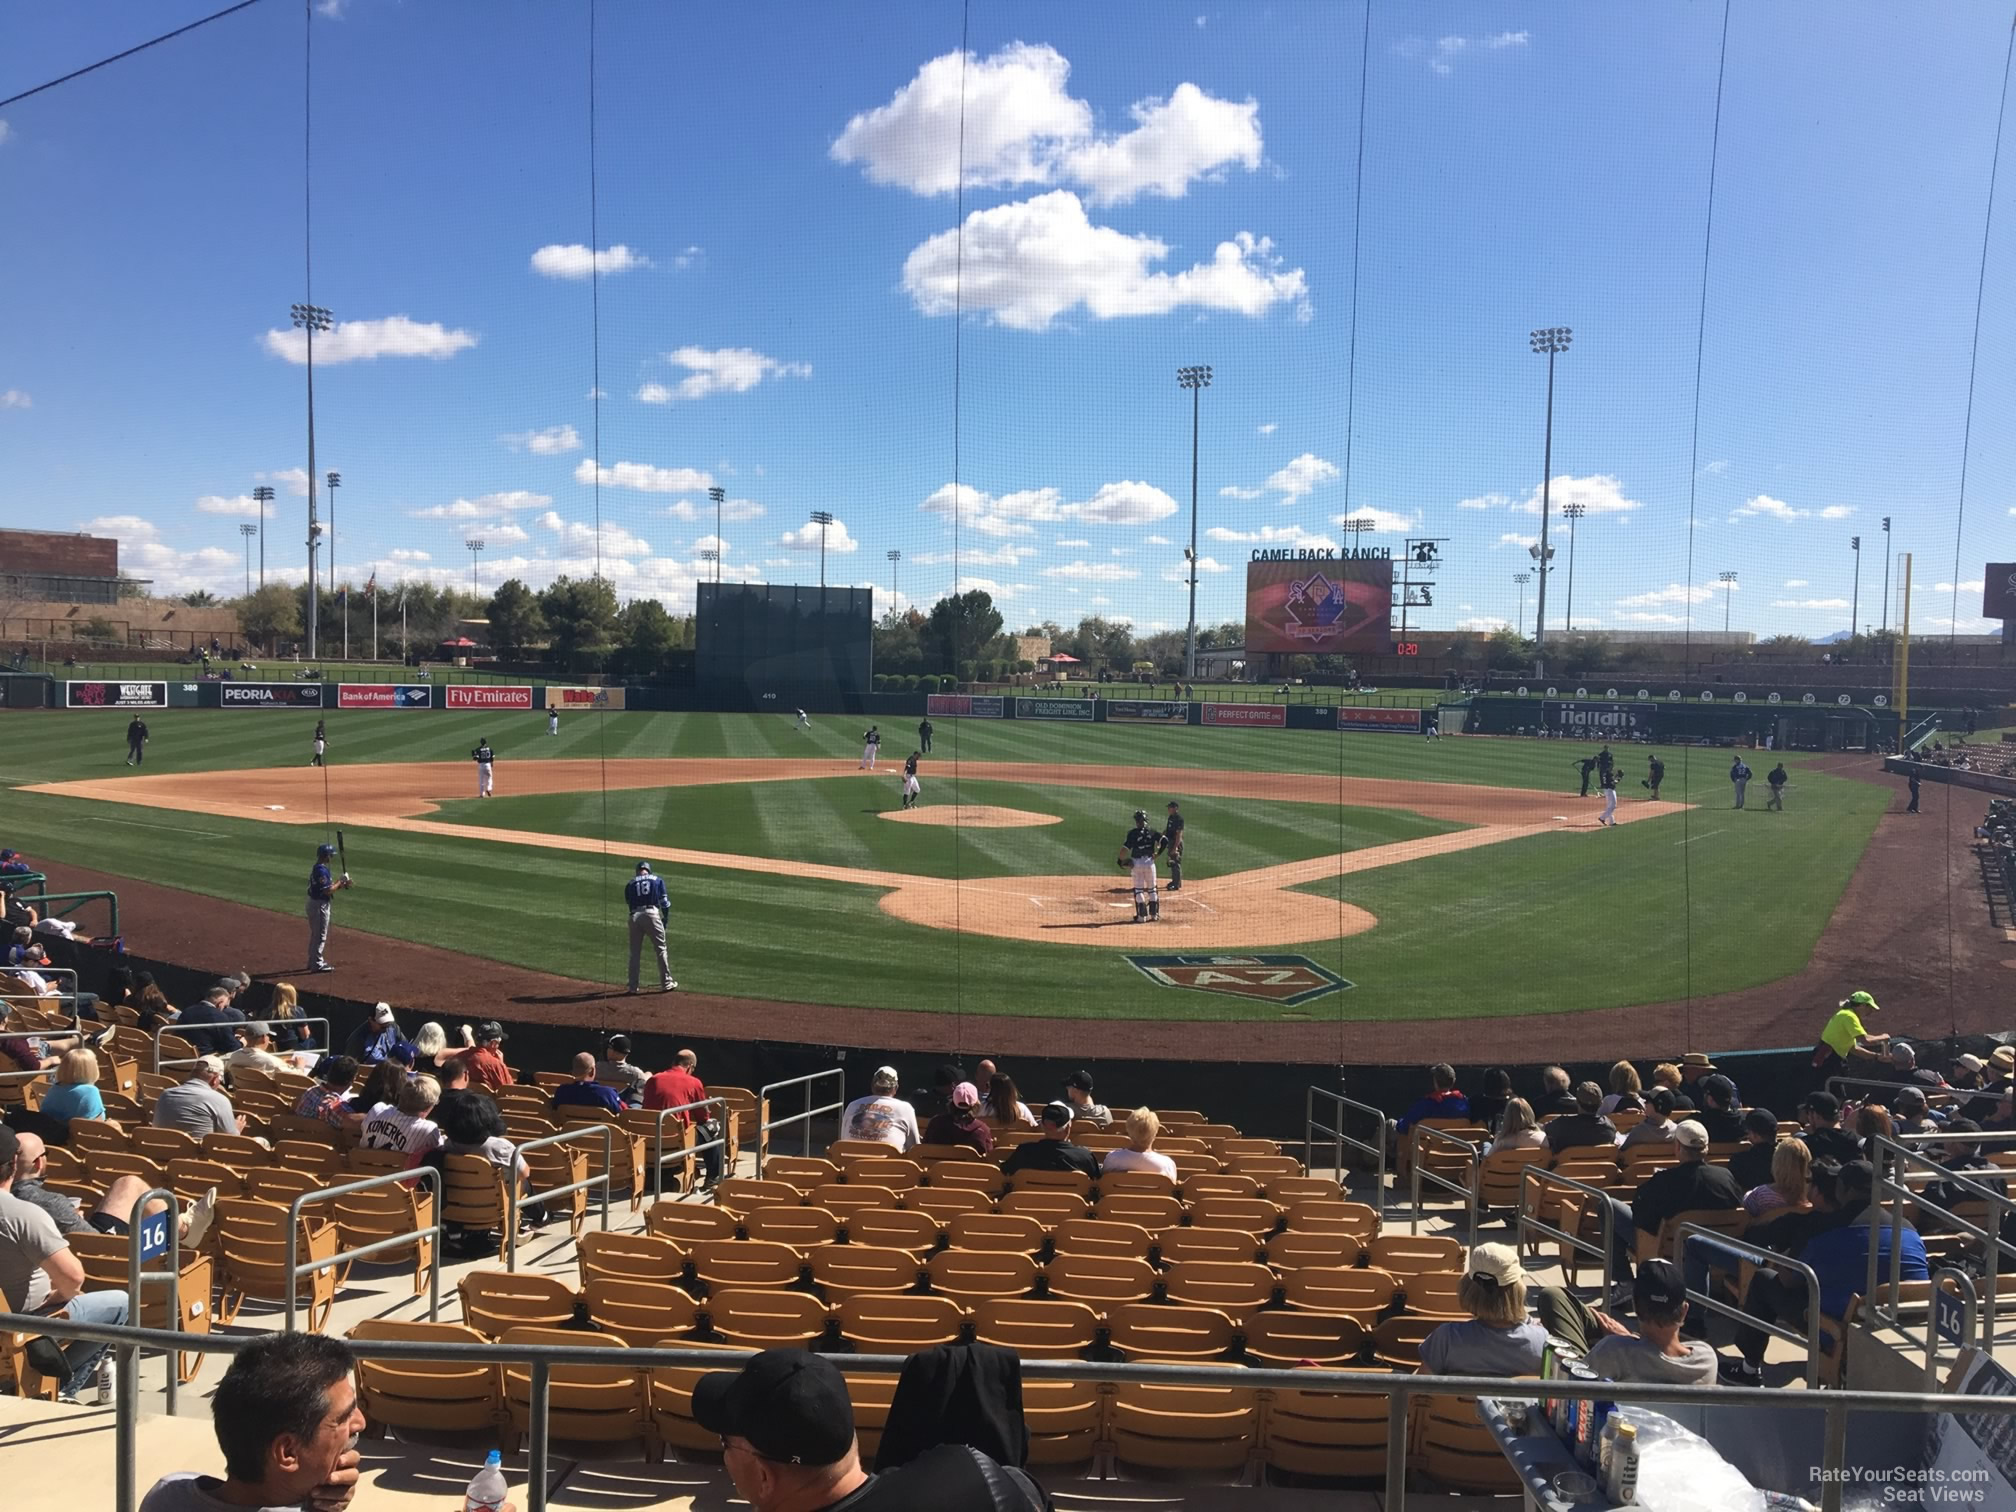 section 116, row 5 seat view  - camelback ranch